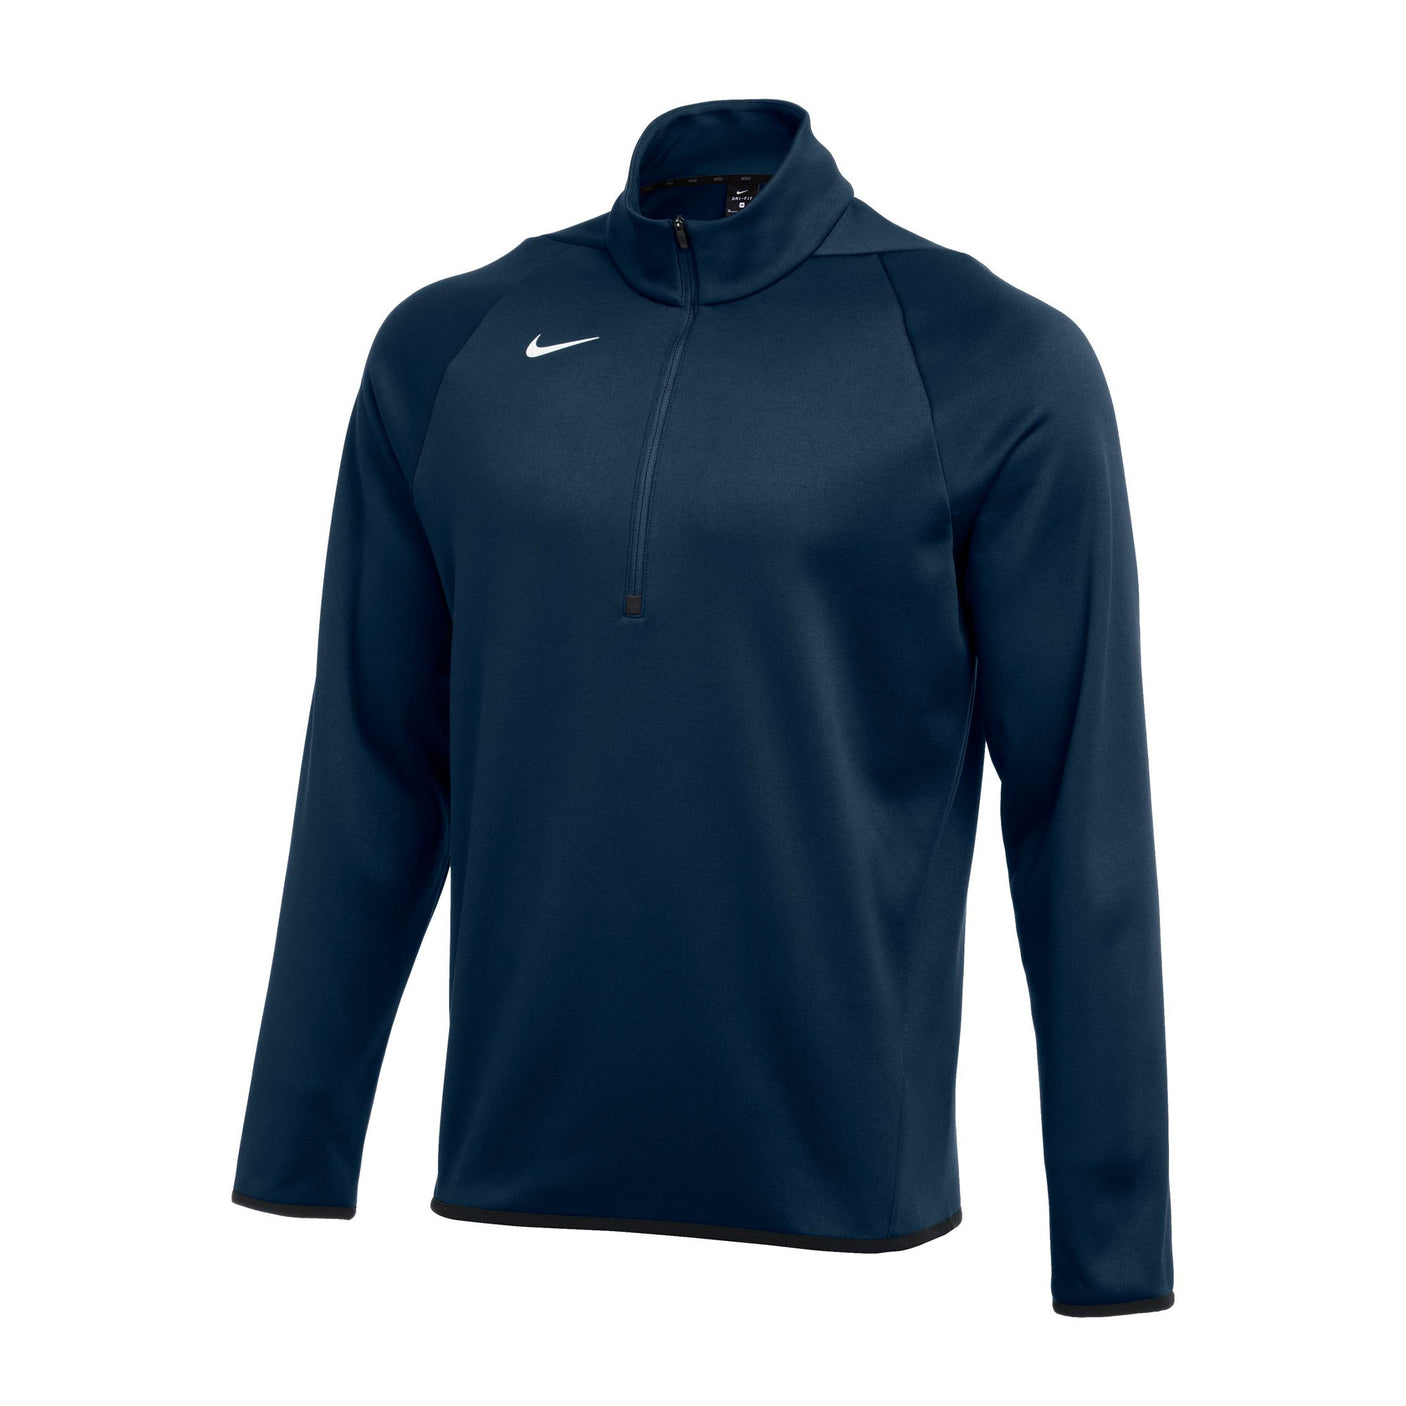 Nike Men's Therma Long Sleeve 2/4 Zip Pullover Top Navy/White Front